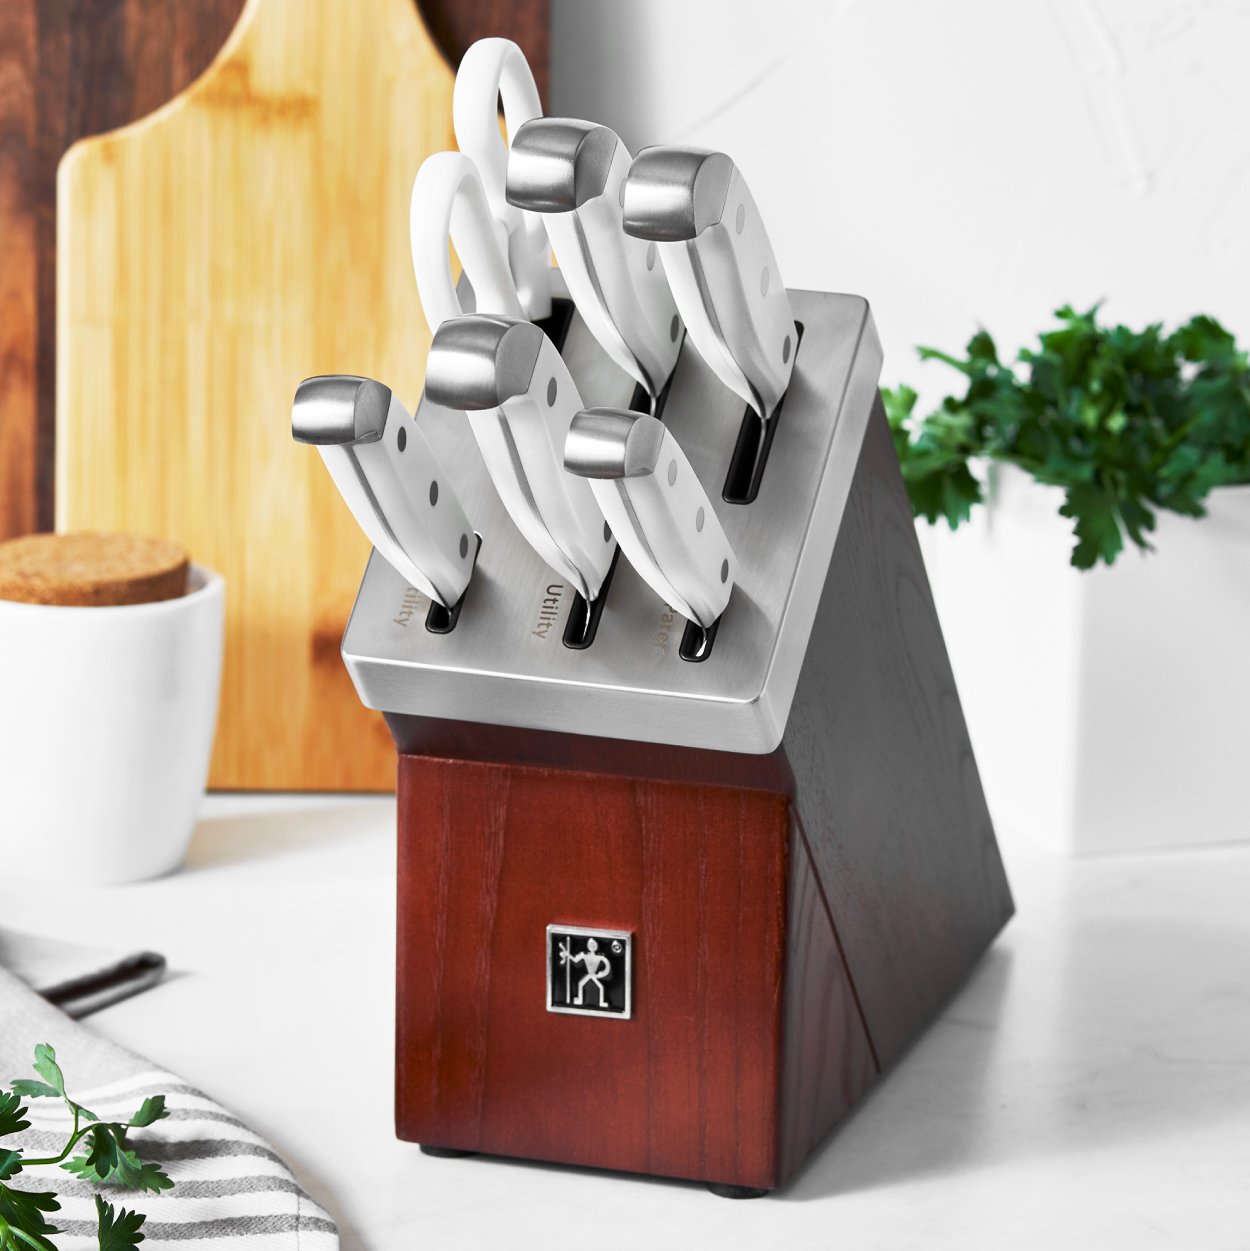 https://www.zwilling.com/on/demandware.static/-/Sites-zwilling-us-Library/default/dw6f5ed5ef/images/product-content/masonry-content/henckels/cutlery/Statement_Mason_Comp_HE_Statement_Masonry_600x600_2.jpg